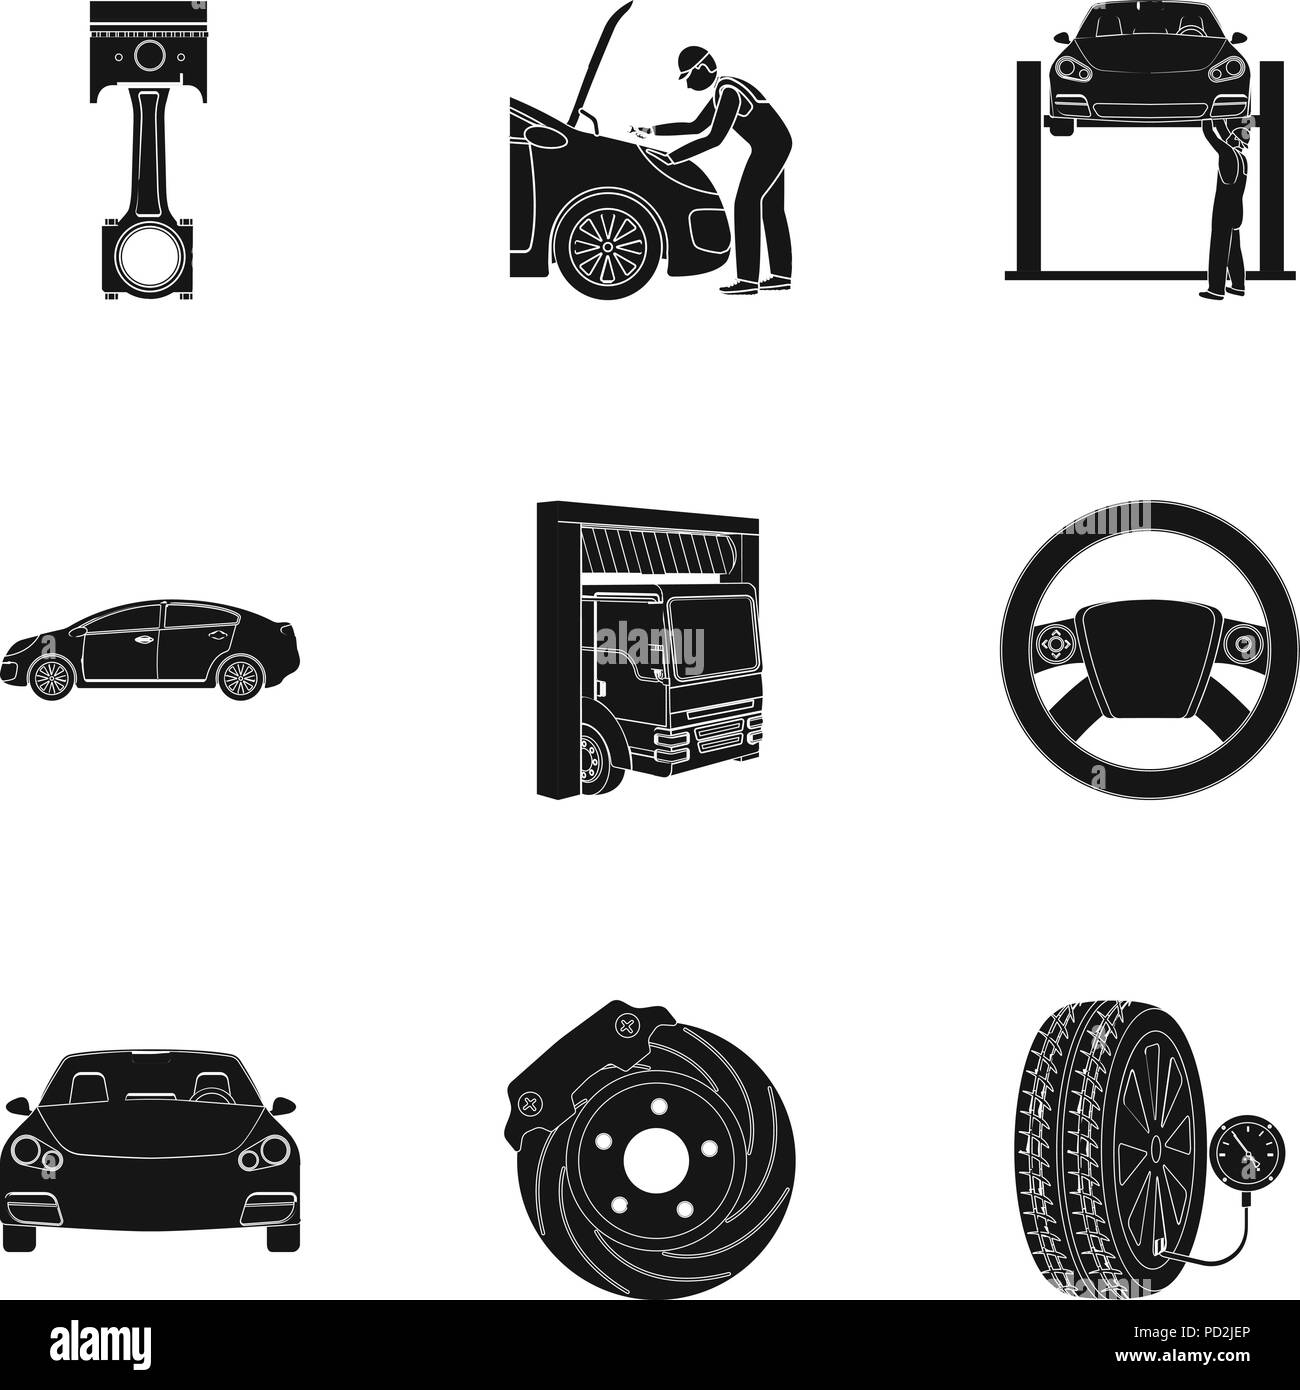 accumulator,adjustment,balancing,black,bonnet,brake,bus,cable,car,clamp,collection,connecting,control,design,device,disc,electricity,elevator,engine,entry,equipment,foot,gauge,gear,icon,illustration,inflating,isolated,lift,logo,maintenance,mechanic,part,piston,pressure,pump,repair,rod,set,shoe,sign,station,steering,symbol,truck,vector,web,wheel,wiring,wrench Vector Vectors , Stock Vector